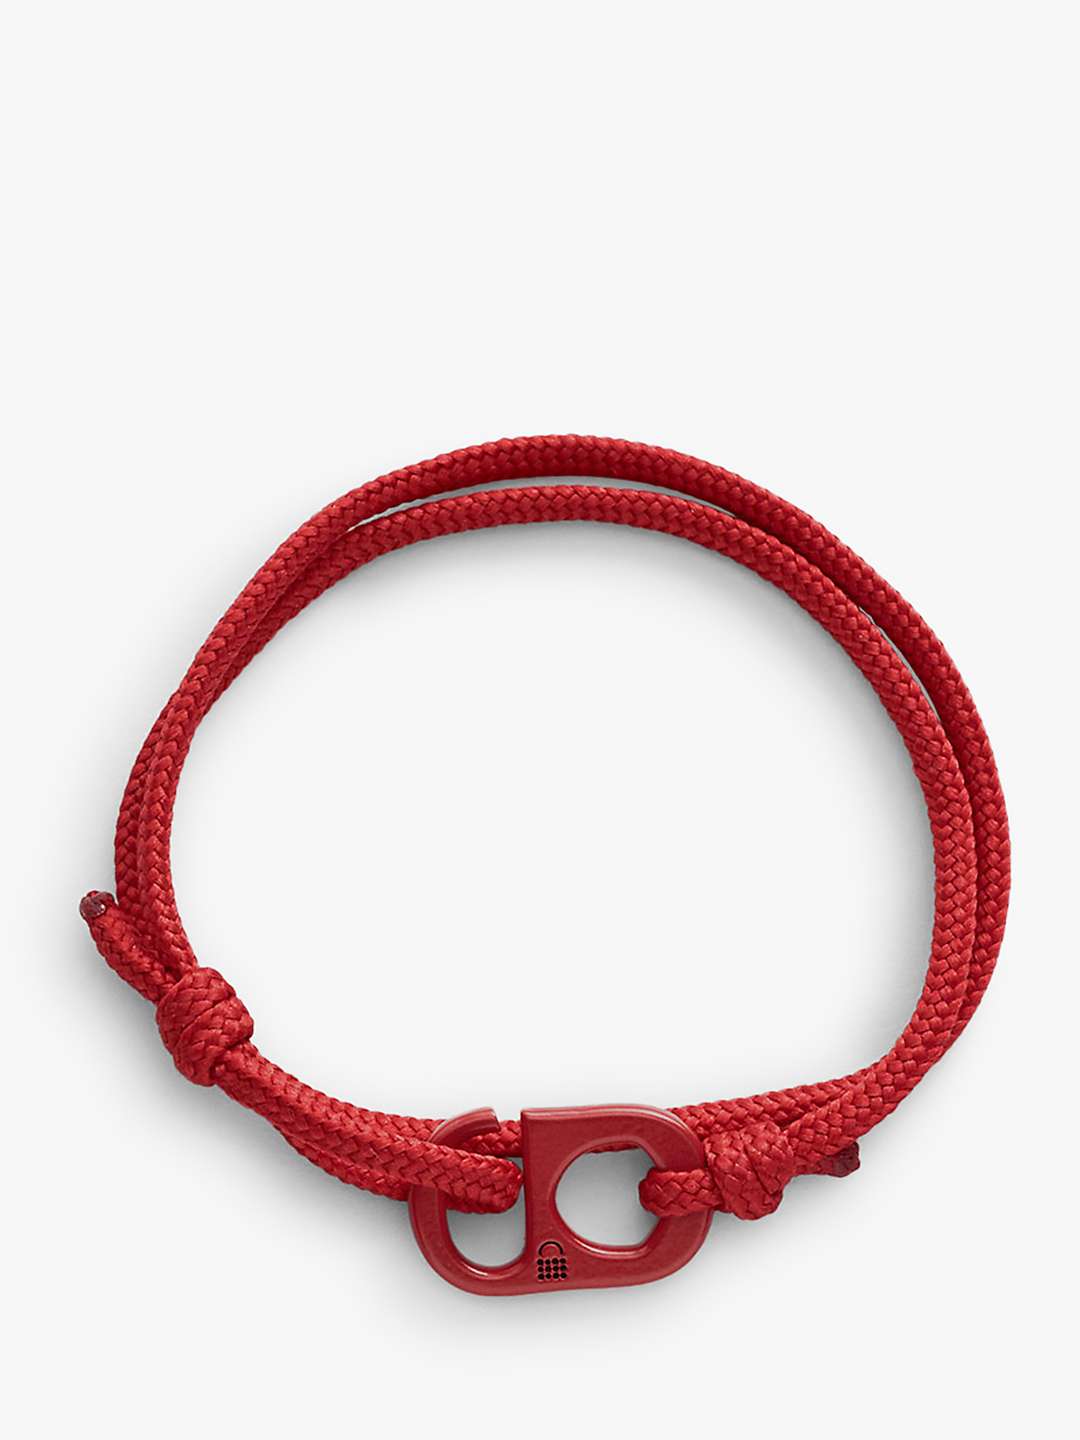 Buy #TOGETHERBAND UN Goal 4 - Quality Education Recycled Plastic Classic Bracelet, Pack of 2, Dark Red Online at johnlewis.com